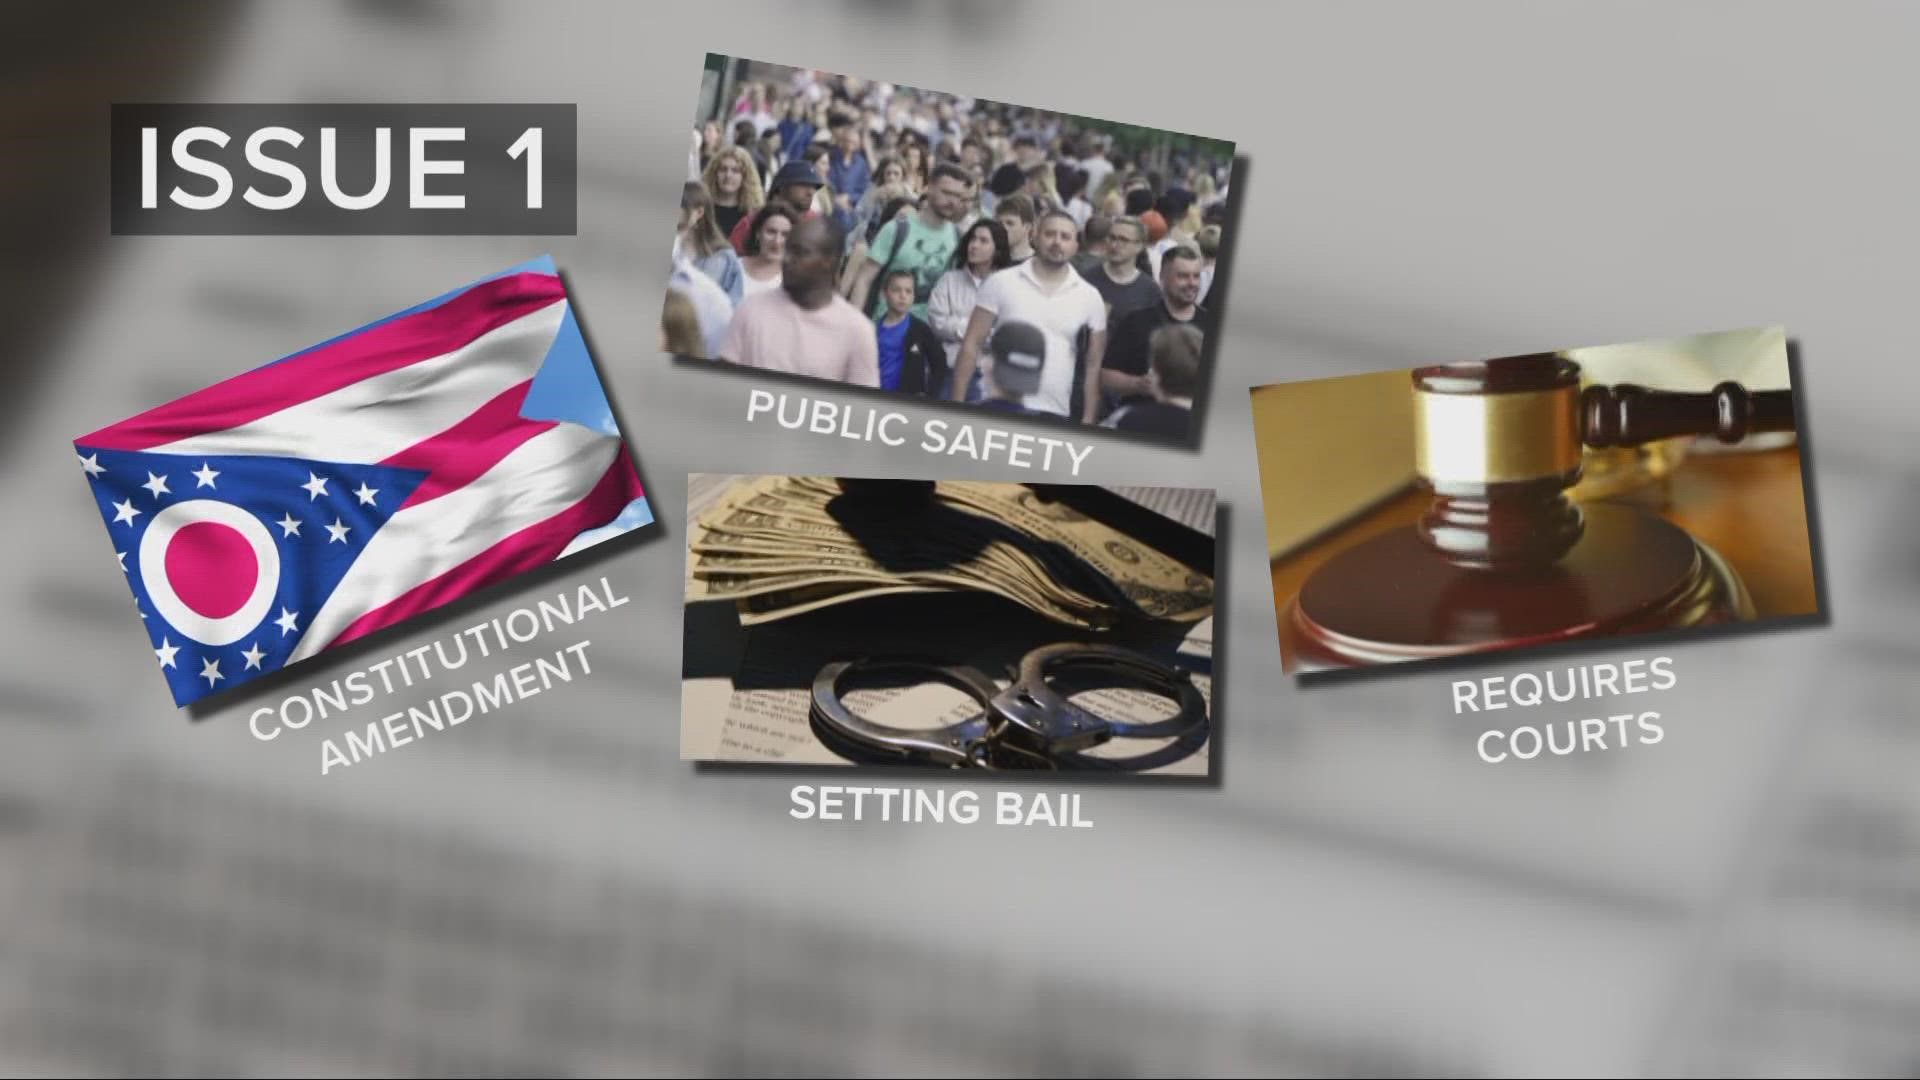 If Issue 1 is passed, it would require judges to consider public safety along with other factors when setting bail.